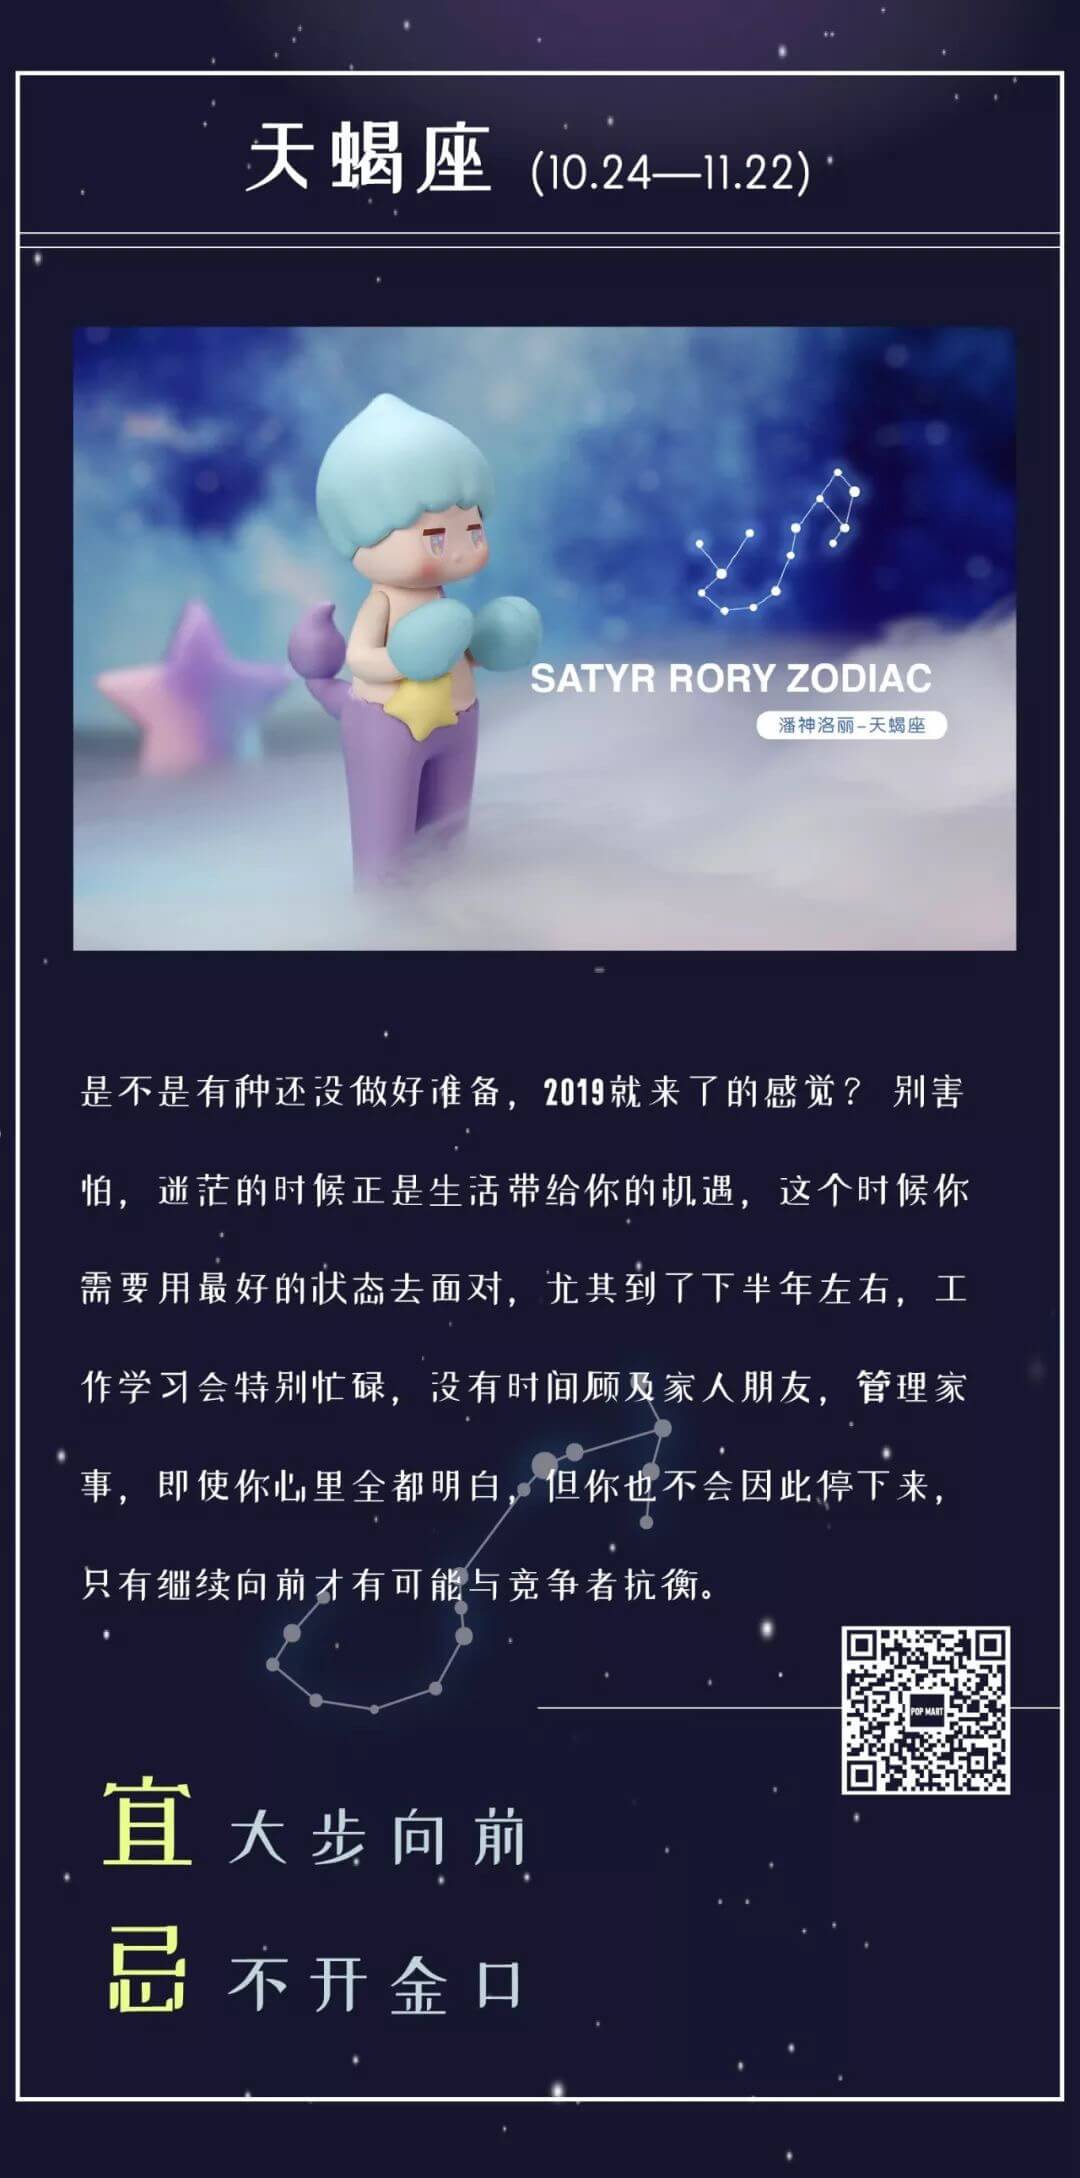 Satyr-Rory-Zodic-Edition-Mini-Series-by-Seulgie-Lee-x-POP-MART-the-toy-chronicle-2019-eeqweq